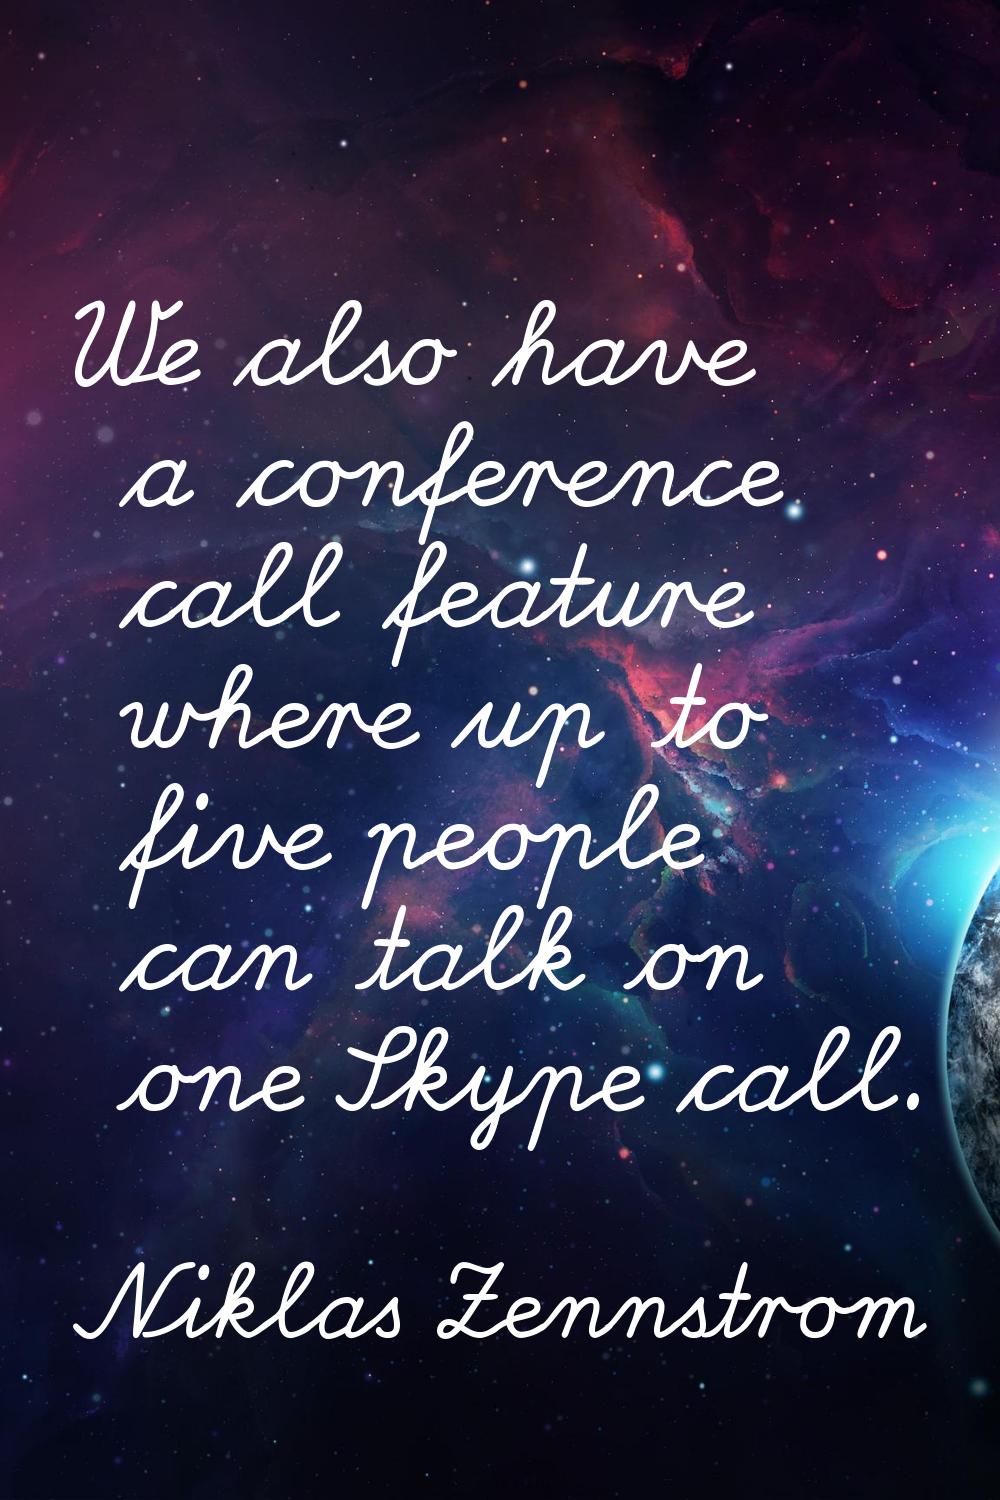 We also have a conference call feature where up to five people can talk on one Skype call.